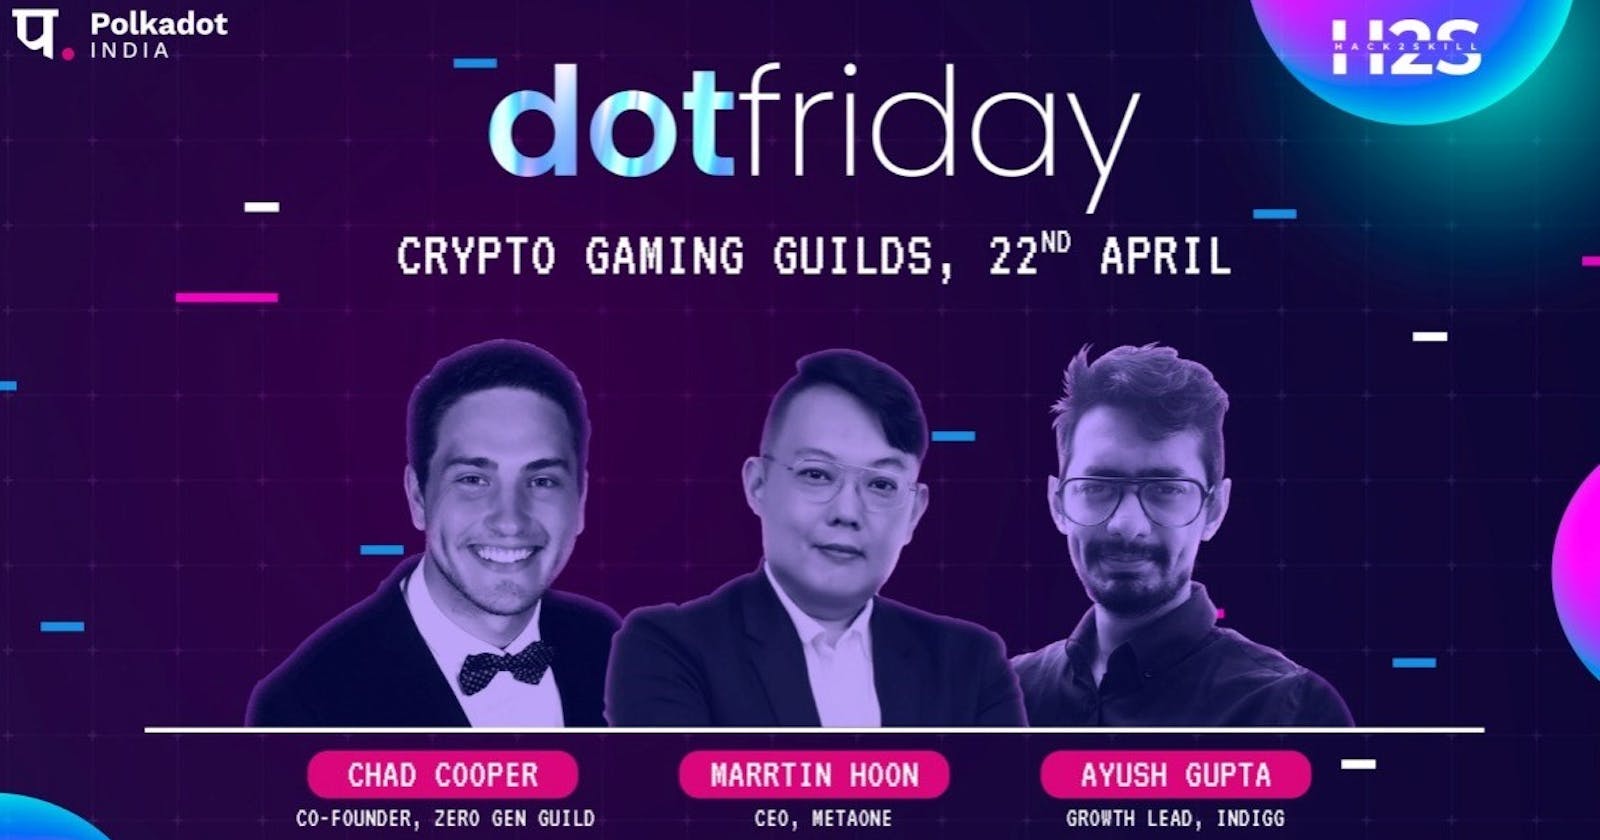 DotFriday by Polkadot India | A Chapter on Gaming Guilds